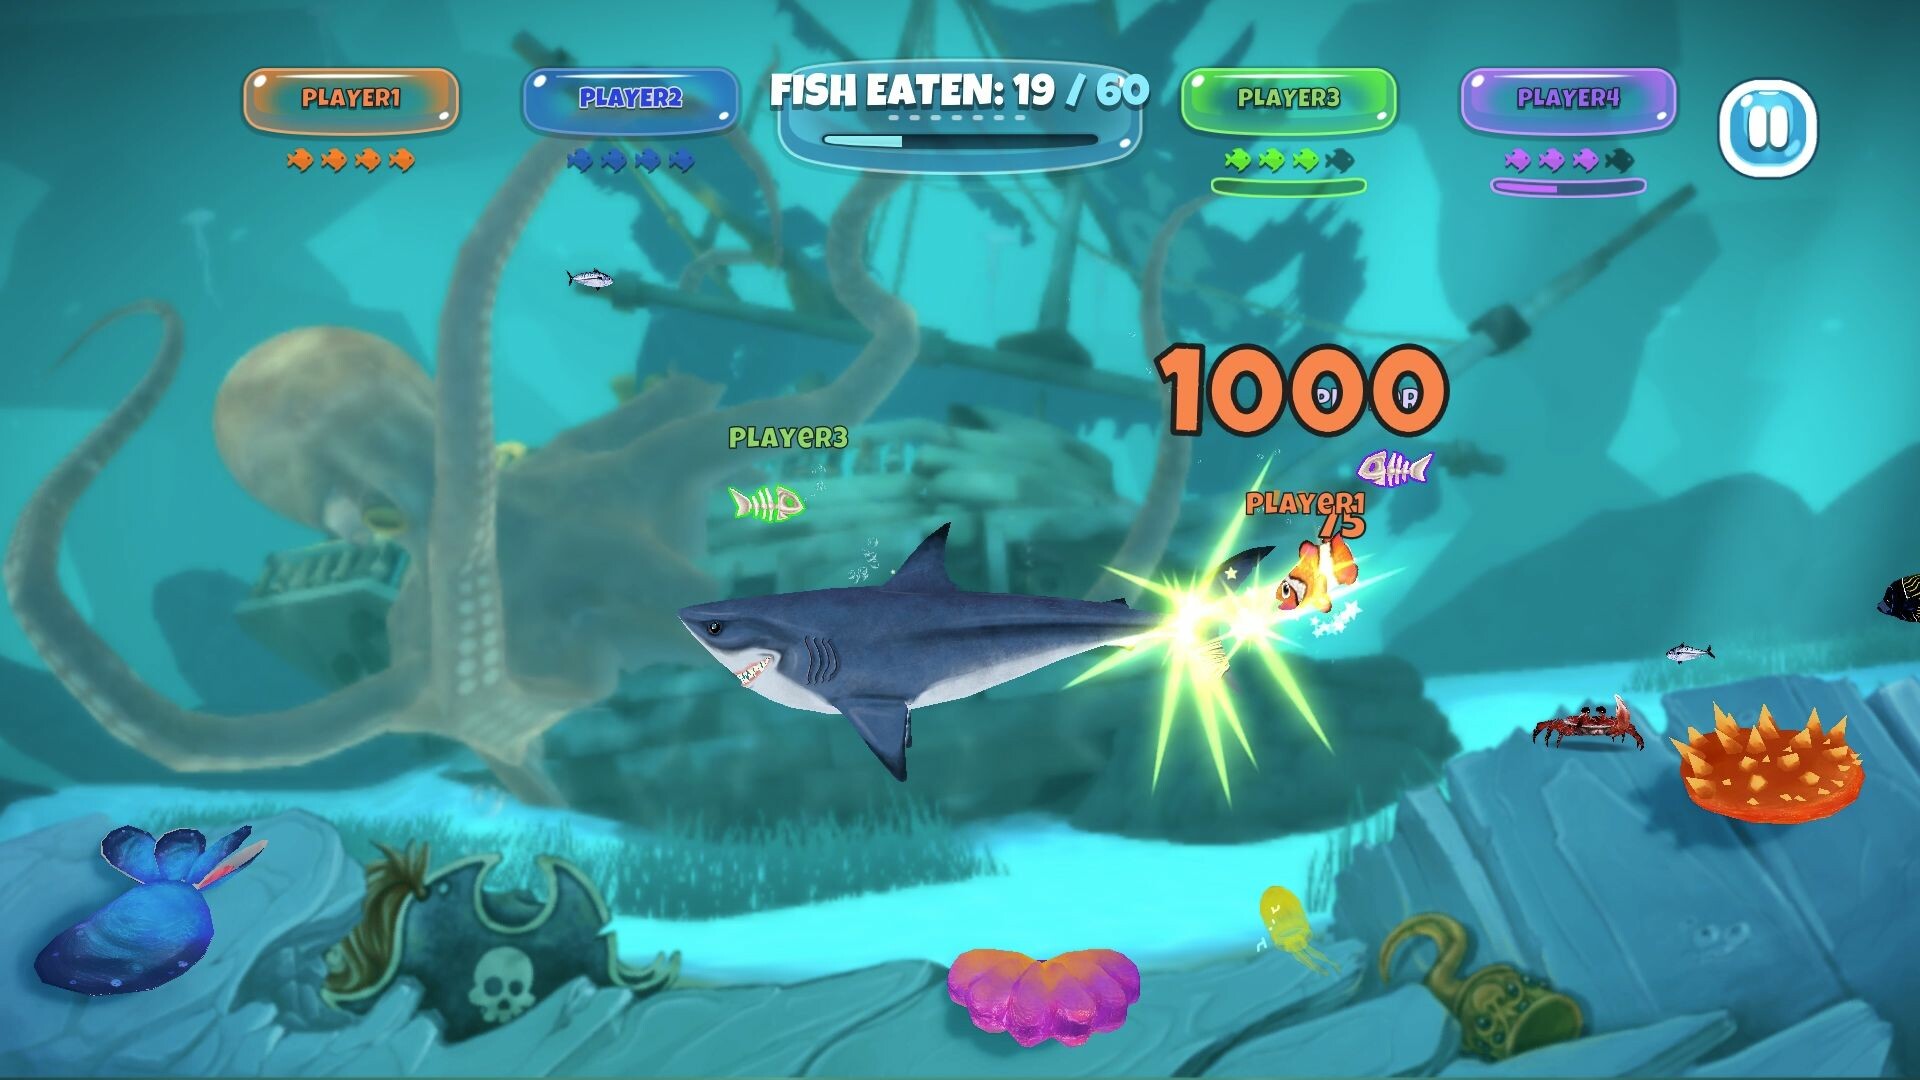 Shark Games - Free online games at